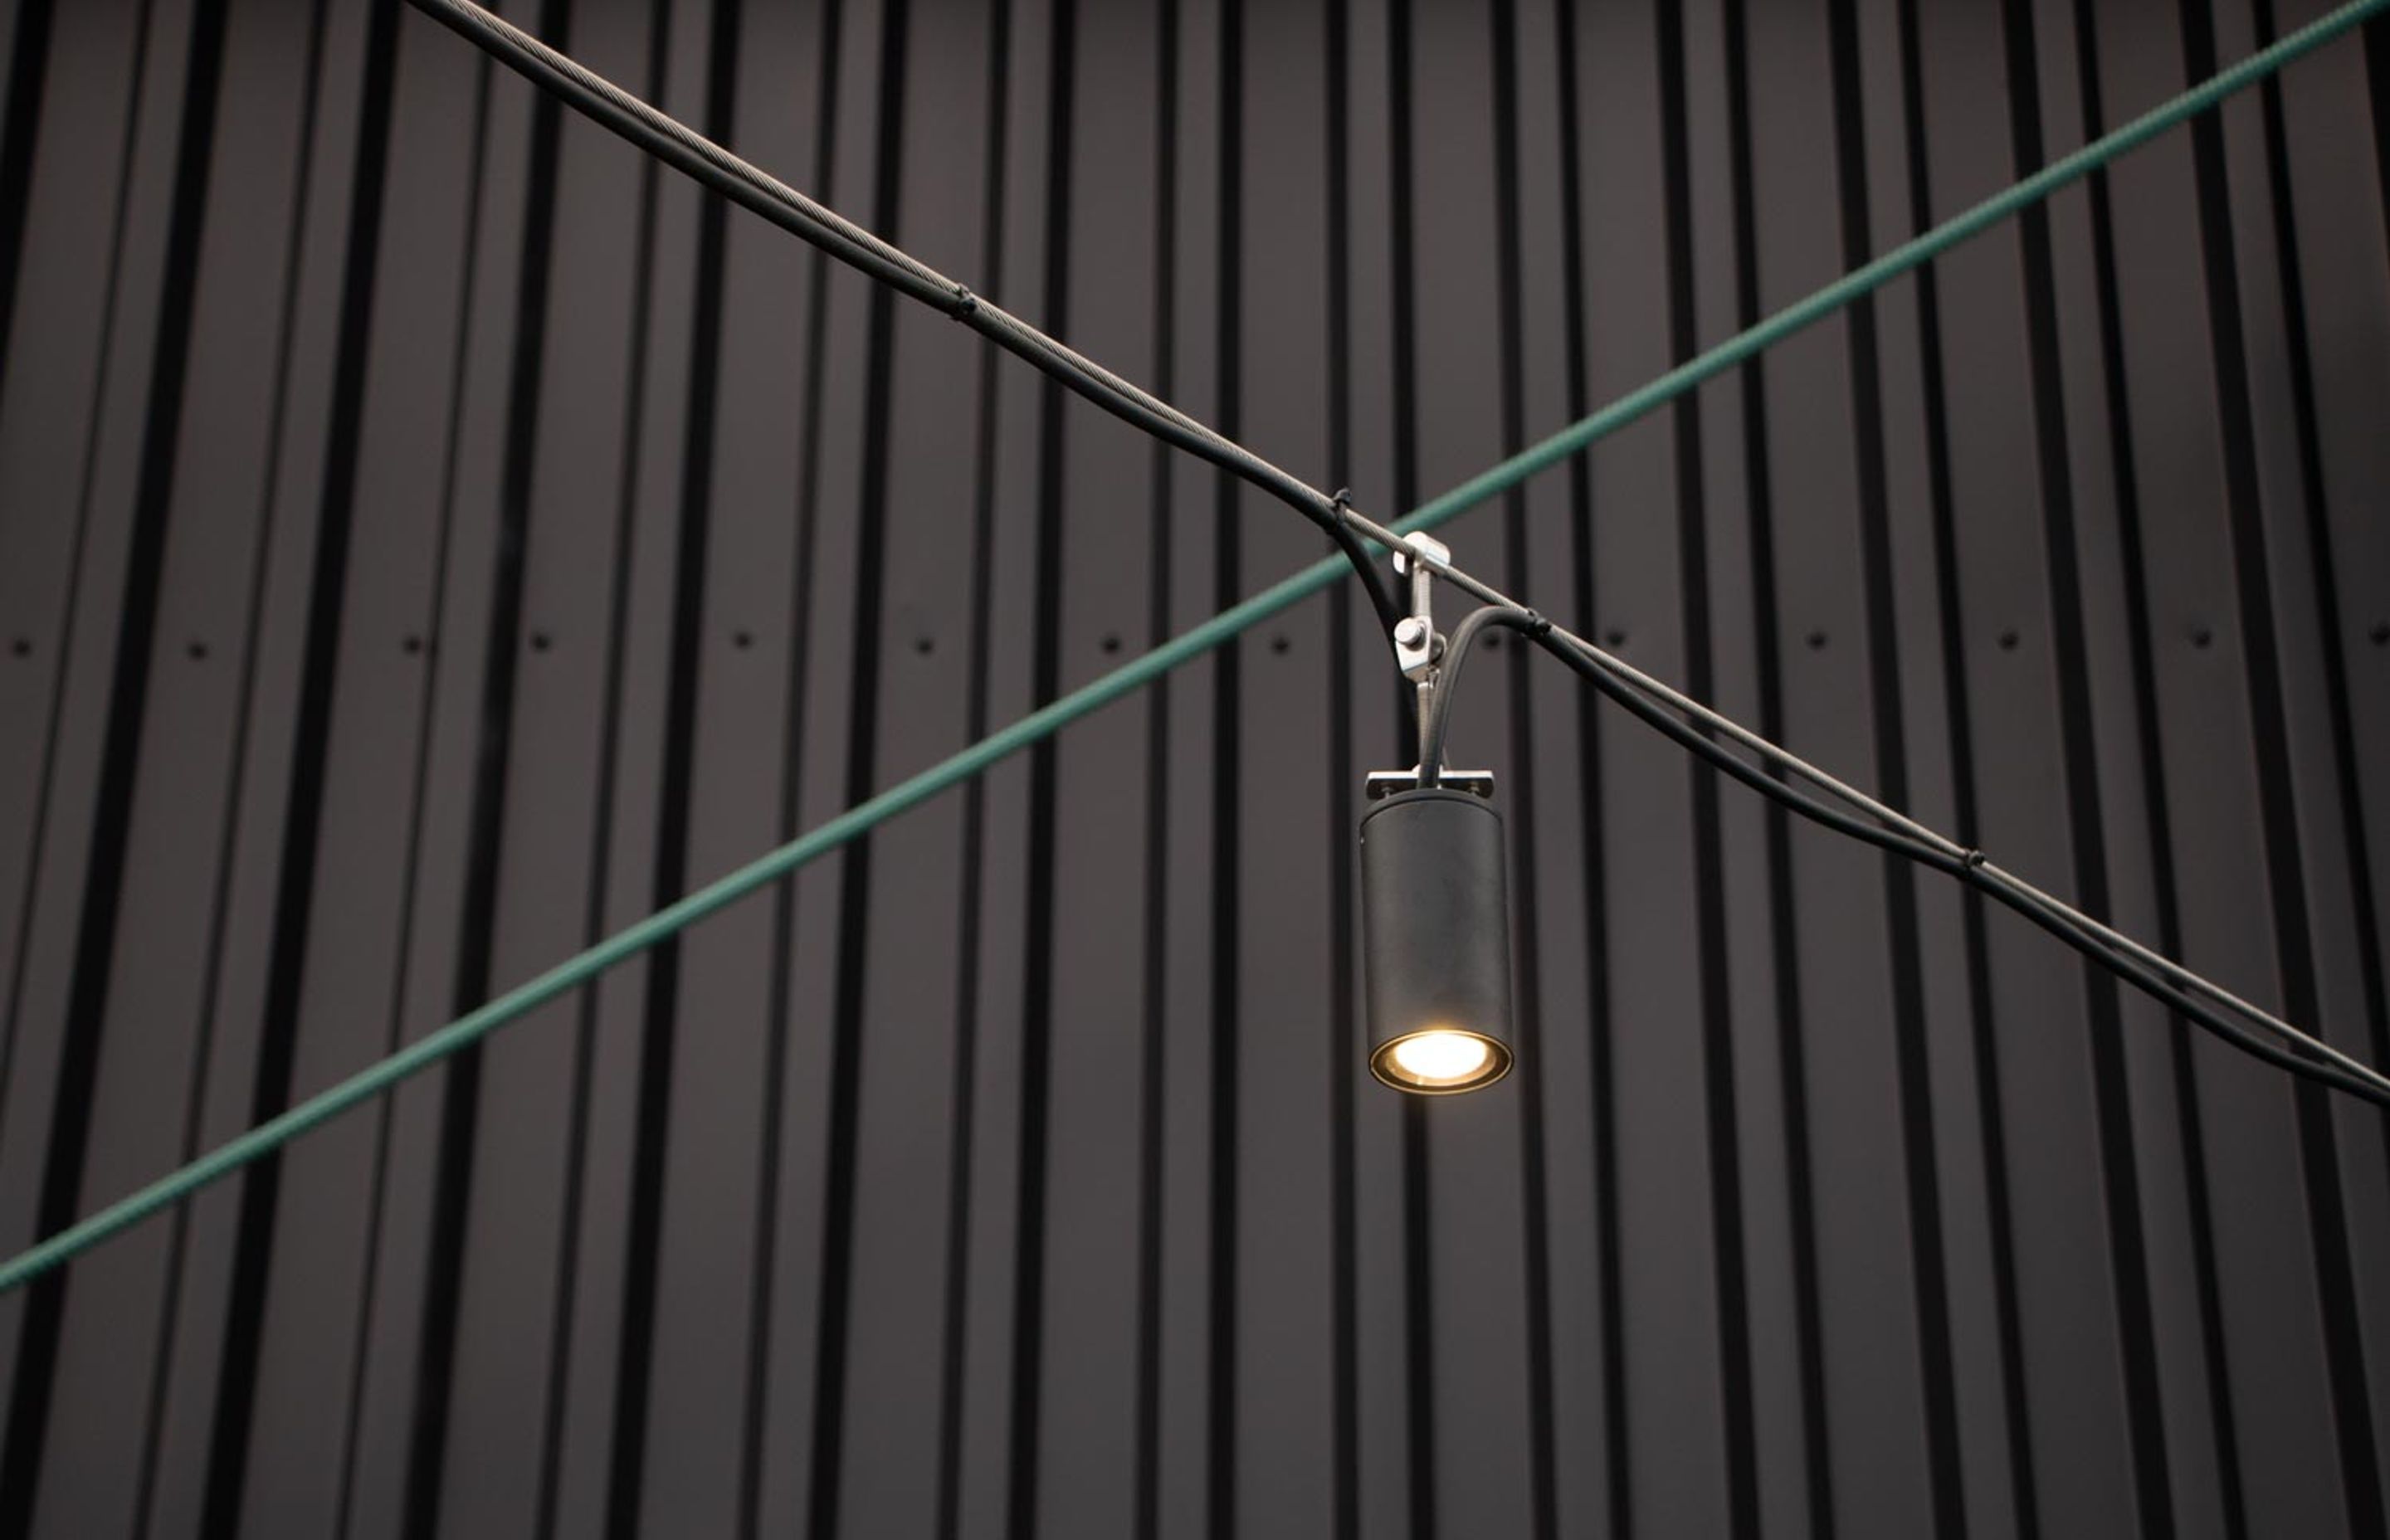 Catenary lighting - Mediaworks Auckland office space